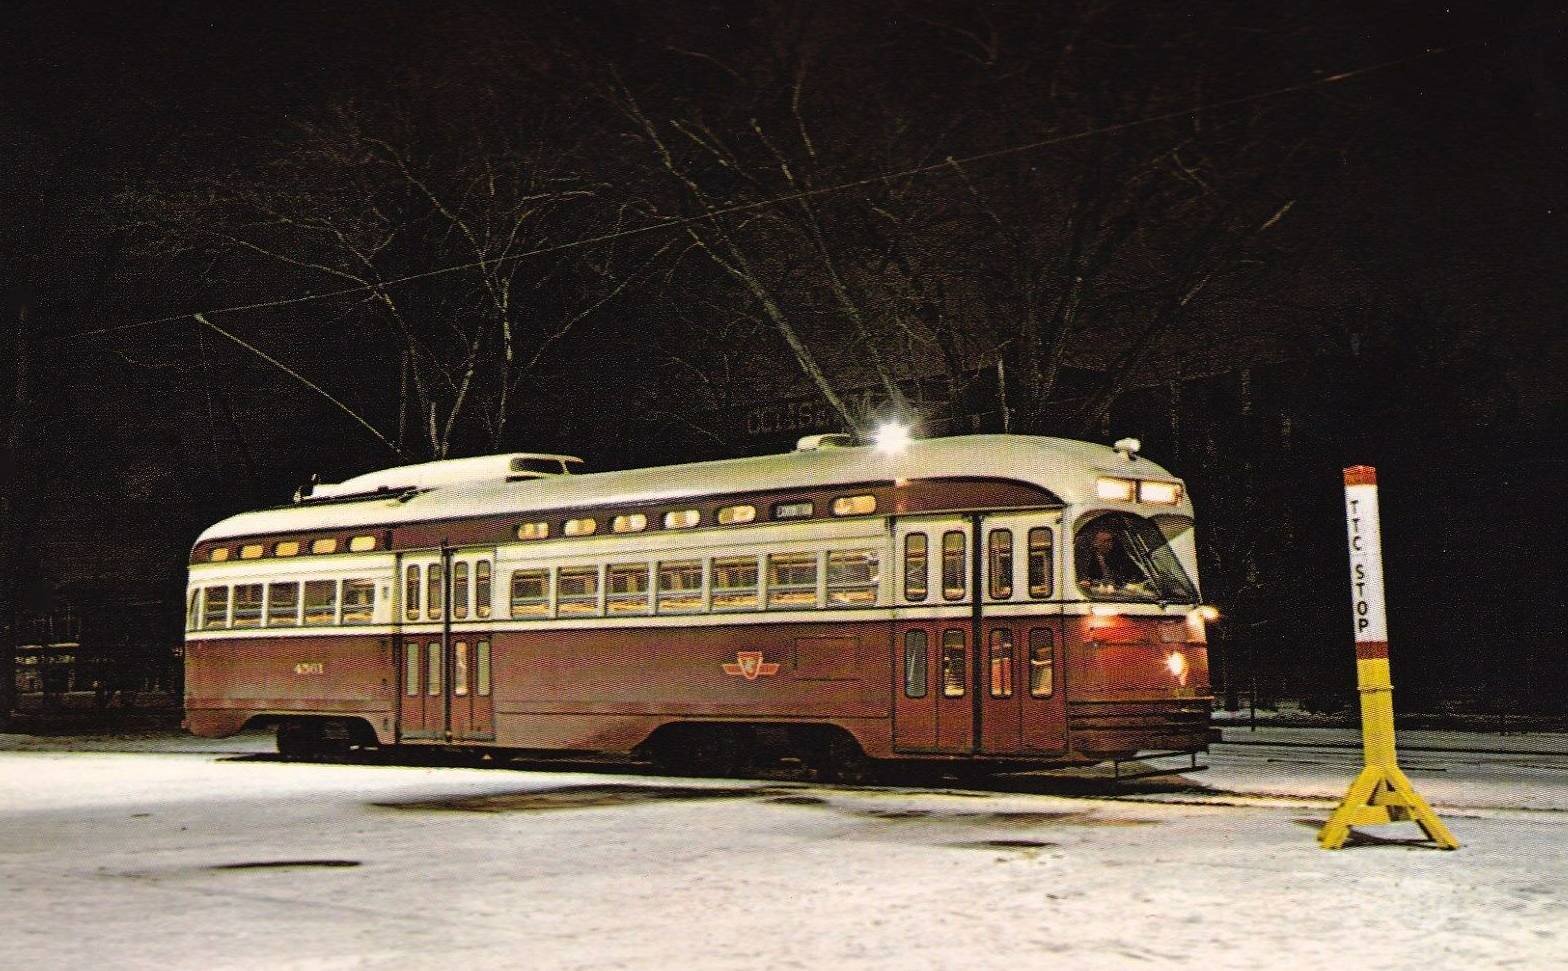 postcard-toronto-exhibition-loop-ttc-pcc-streetcar-night-note-tempoary-stop-sign-used-generally-an-image-with-a-real-feel-of-its-time-nice-version-1966.jpg